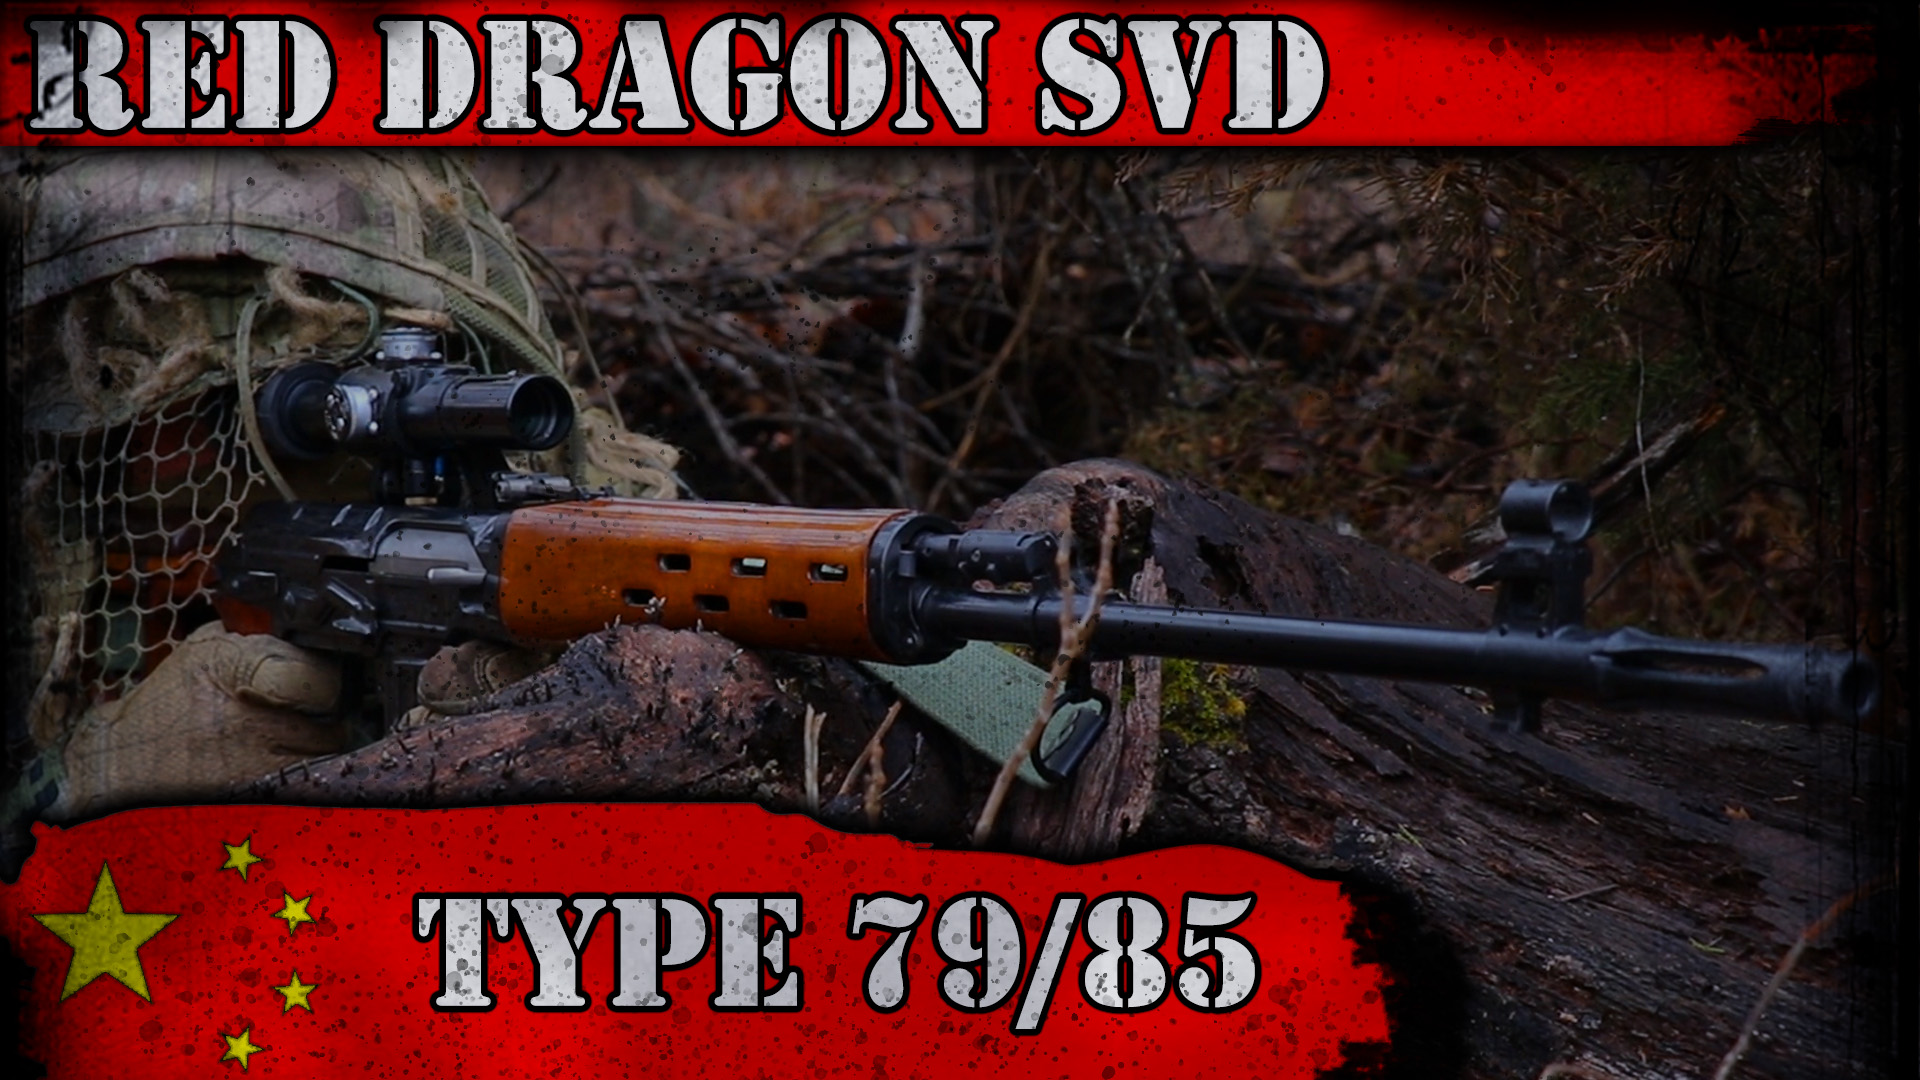 Chinese Dragunov Type 79 / 85 – History of The Red Dragon SVD!